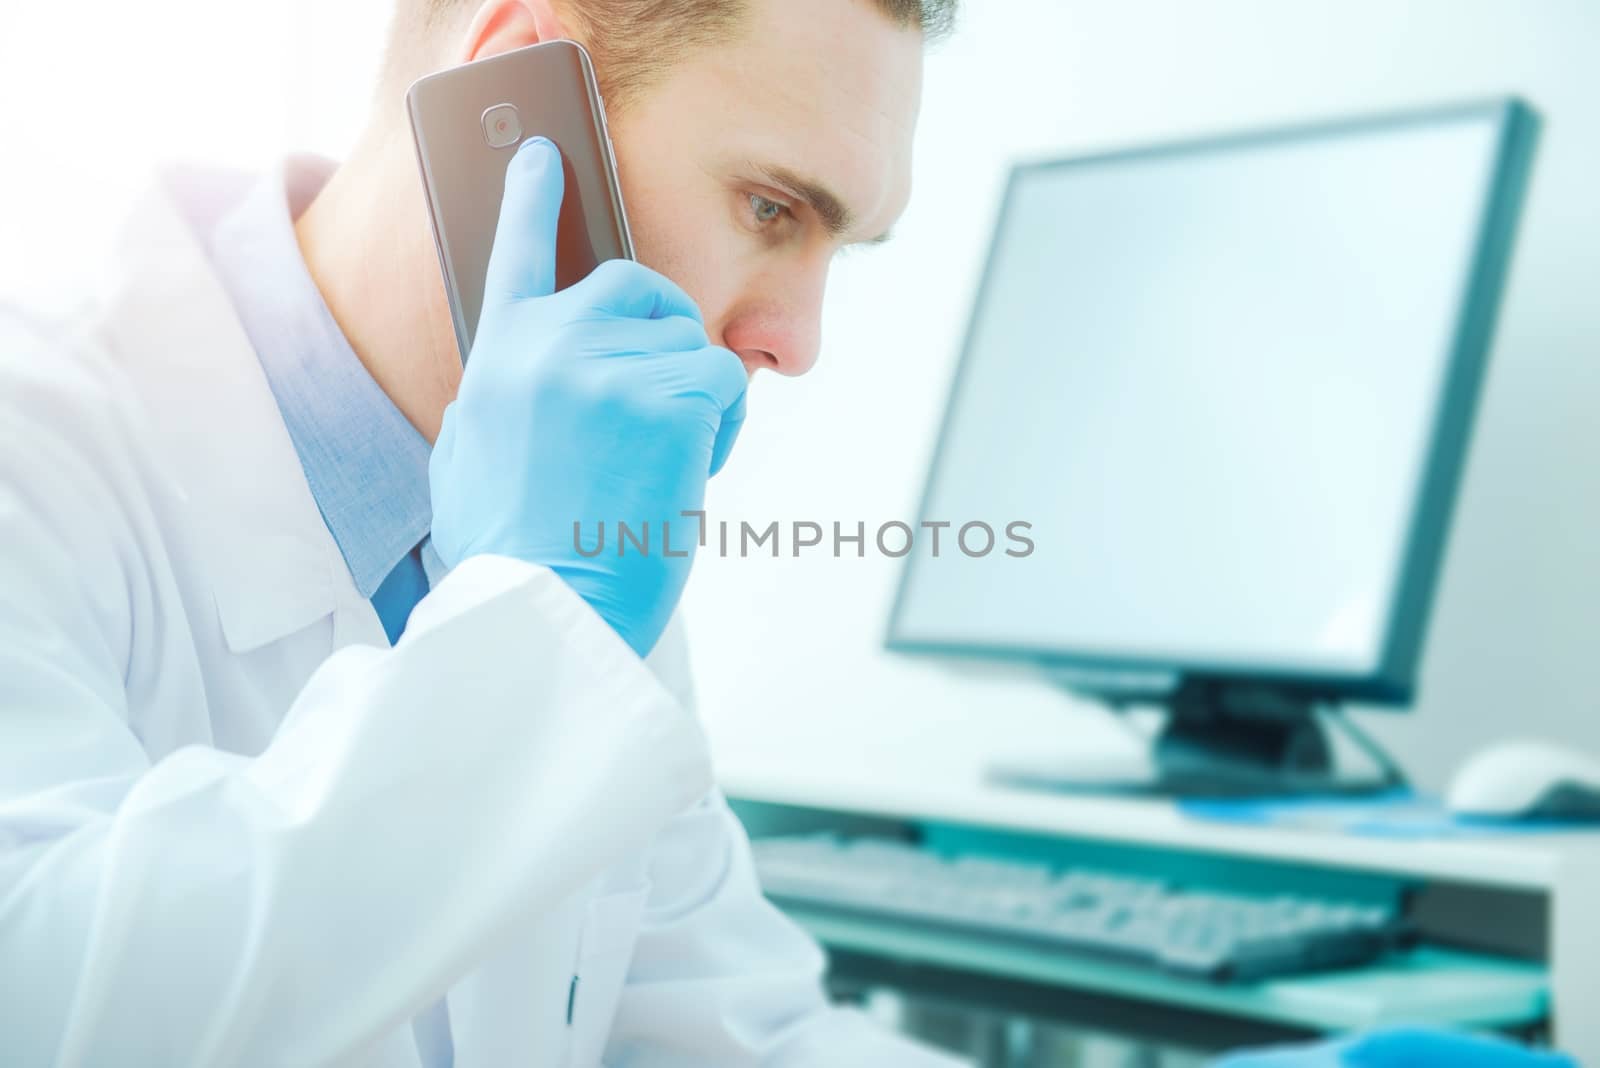 Doctor Phone Call Consultation. Medical Doctor Using His Phone and Computer To Get Second Opinion. Mid 30s Caucasian Doctor.